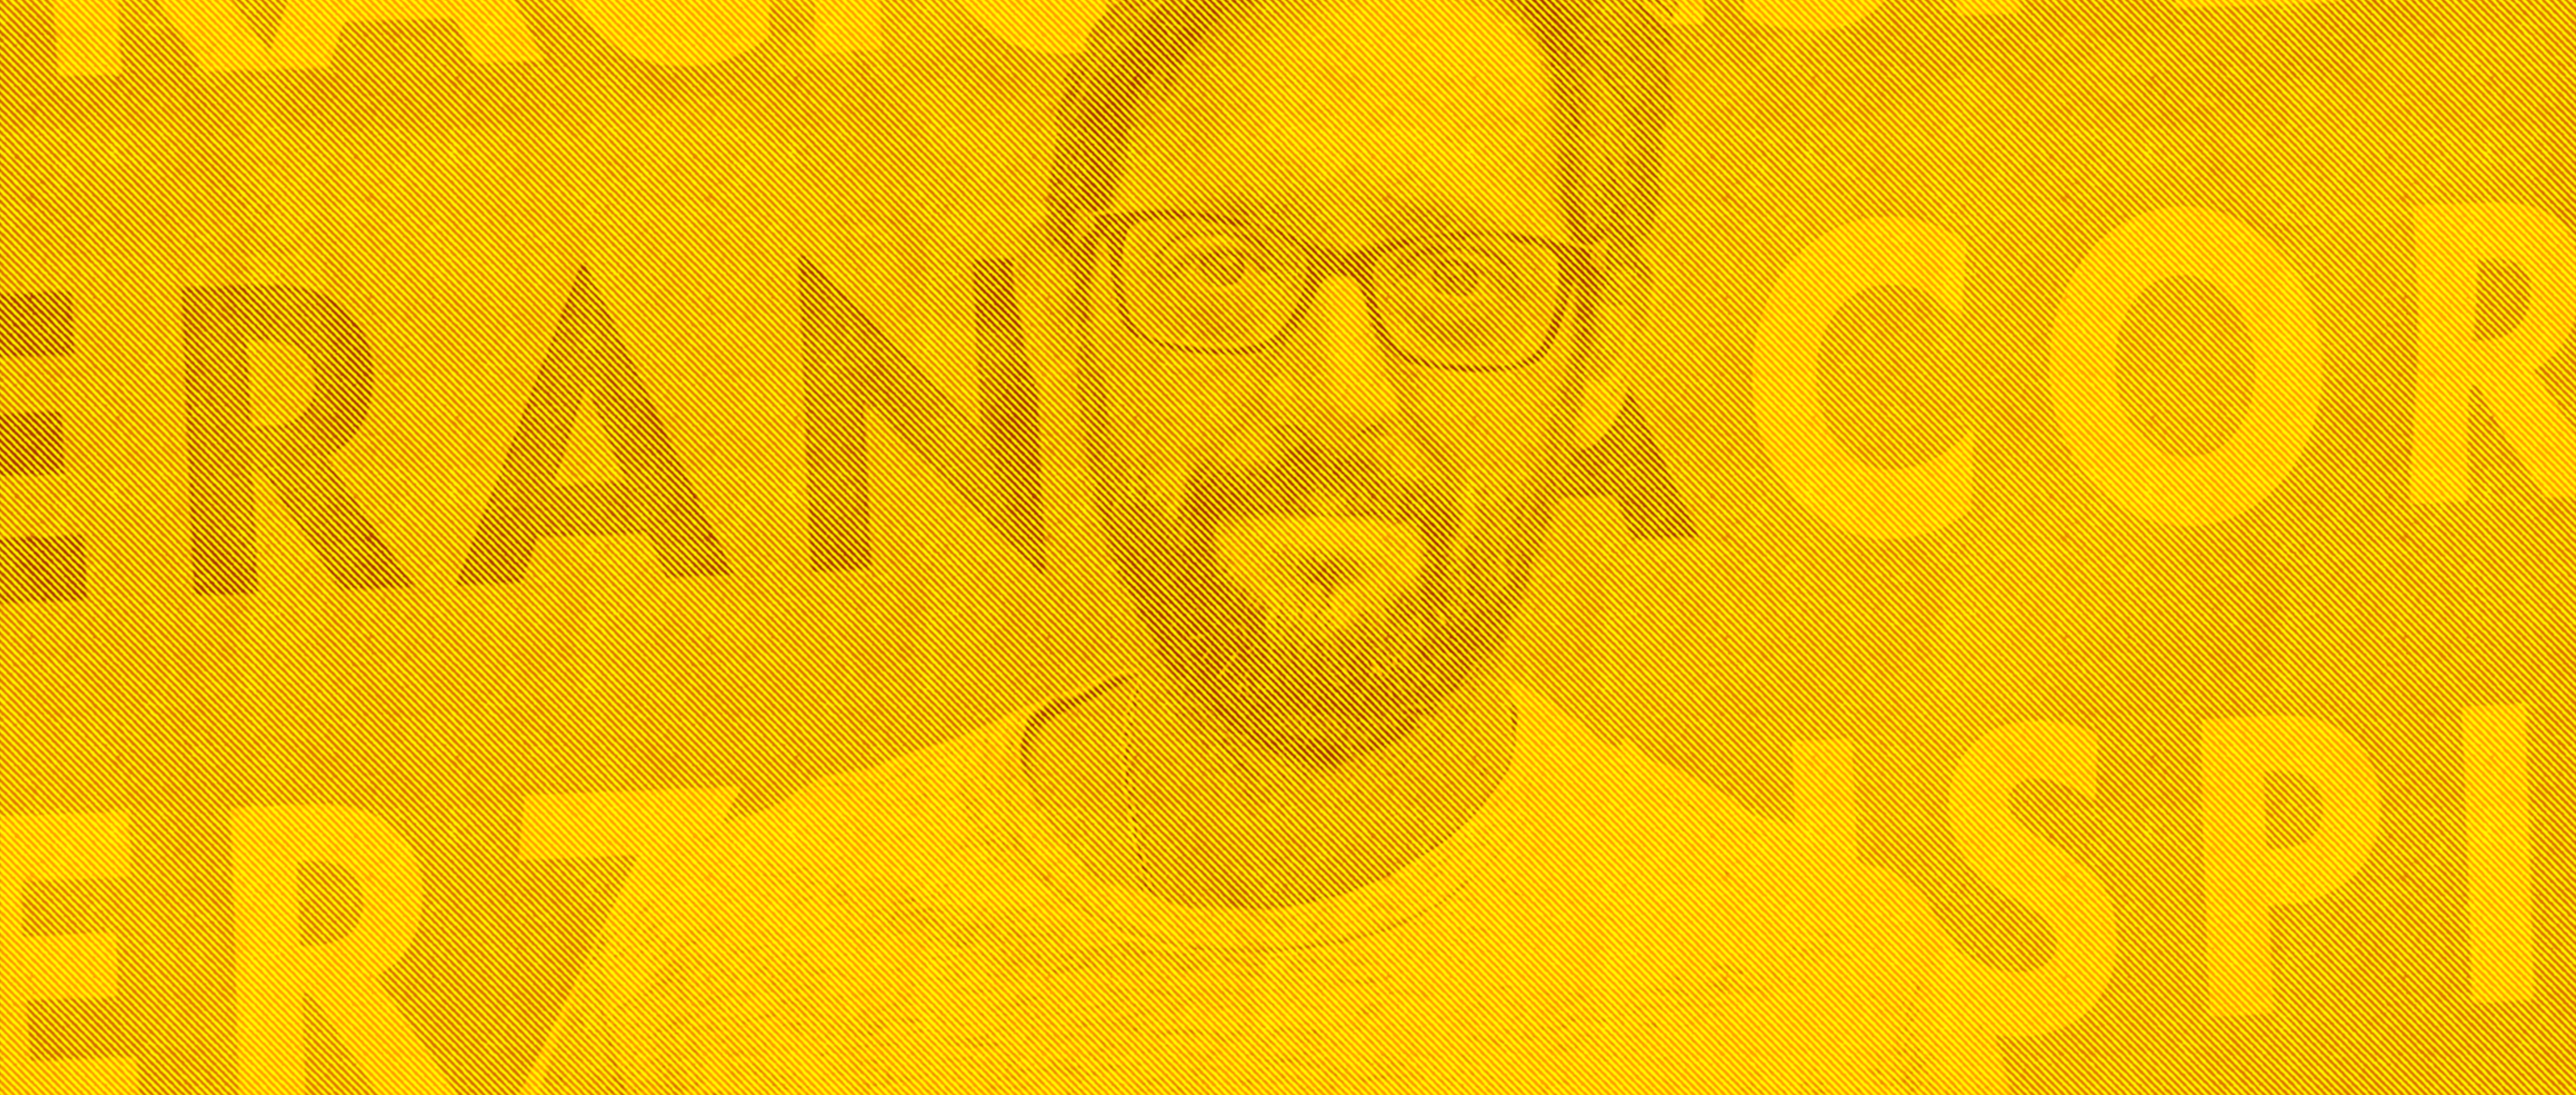 A man with glasses posing against a yellow backdrop